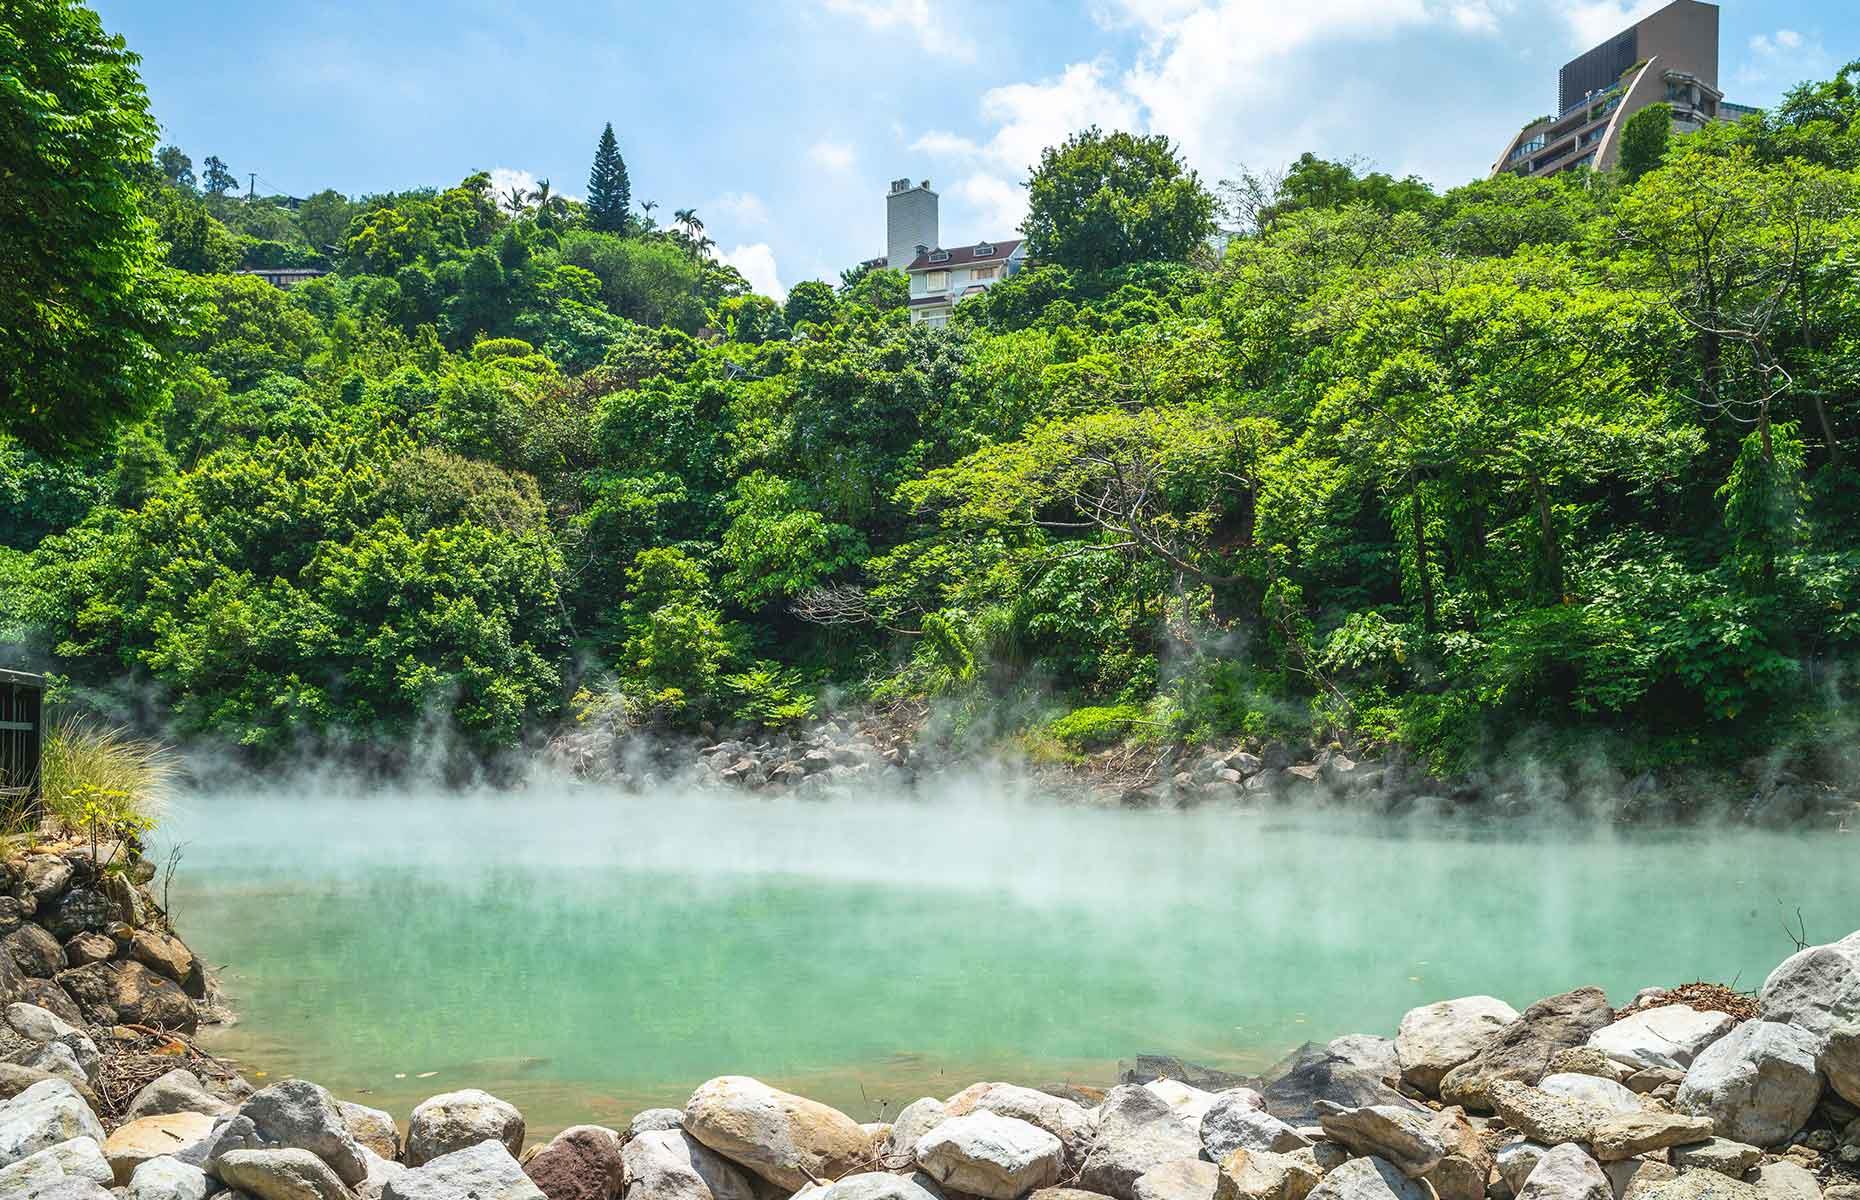 <p>Thermal Valley, situated on the northern fringes of Taipei, is one of the most breathtaking sights in Taiwan. Its steaming, turquoise waters give an ethereal feel but visitors should certainly take heed of its ‘Death Valley’ nickname. The waters are a sizzling 212<strong>°</strong>F (100<strong>°</strong>C) and the Beitou rocks – which can only be found in Taiwan and Japan – contain a radioactive element of radium. It’s best to stick to the wooden walkway that lines the valley, visit one of the public hot springs and admire the surrounding foliage.</p>